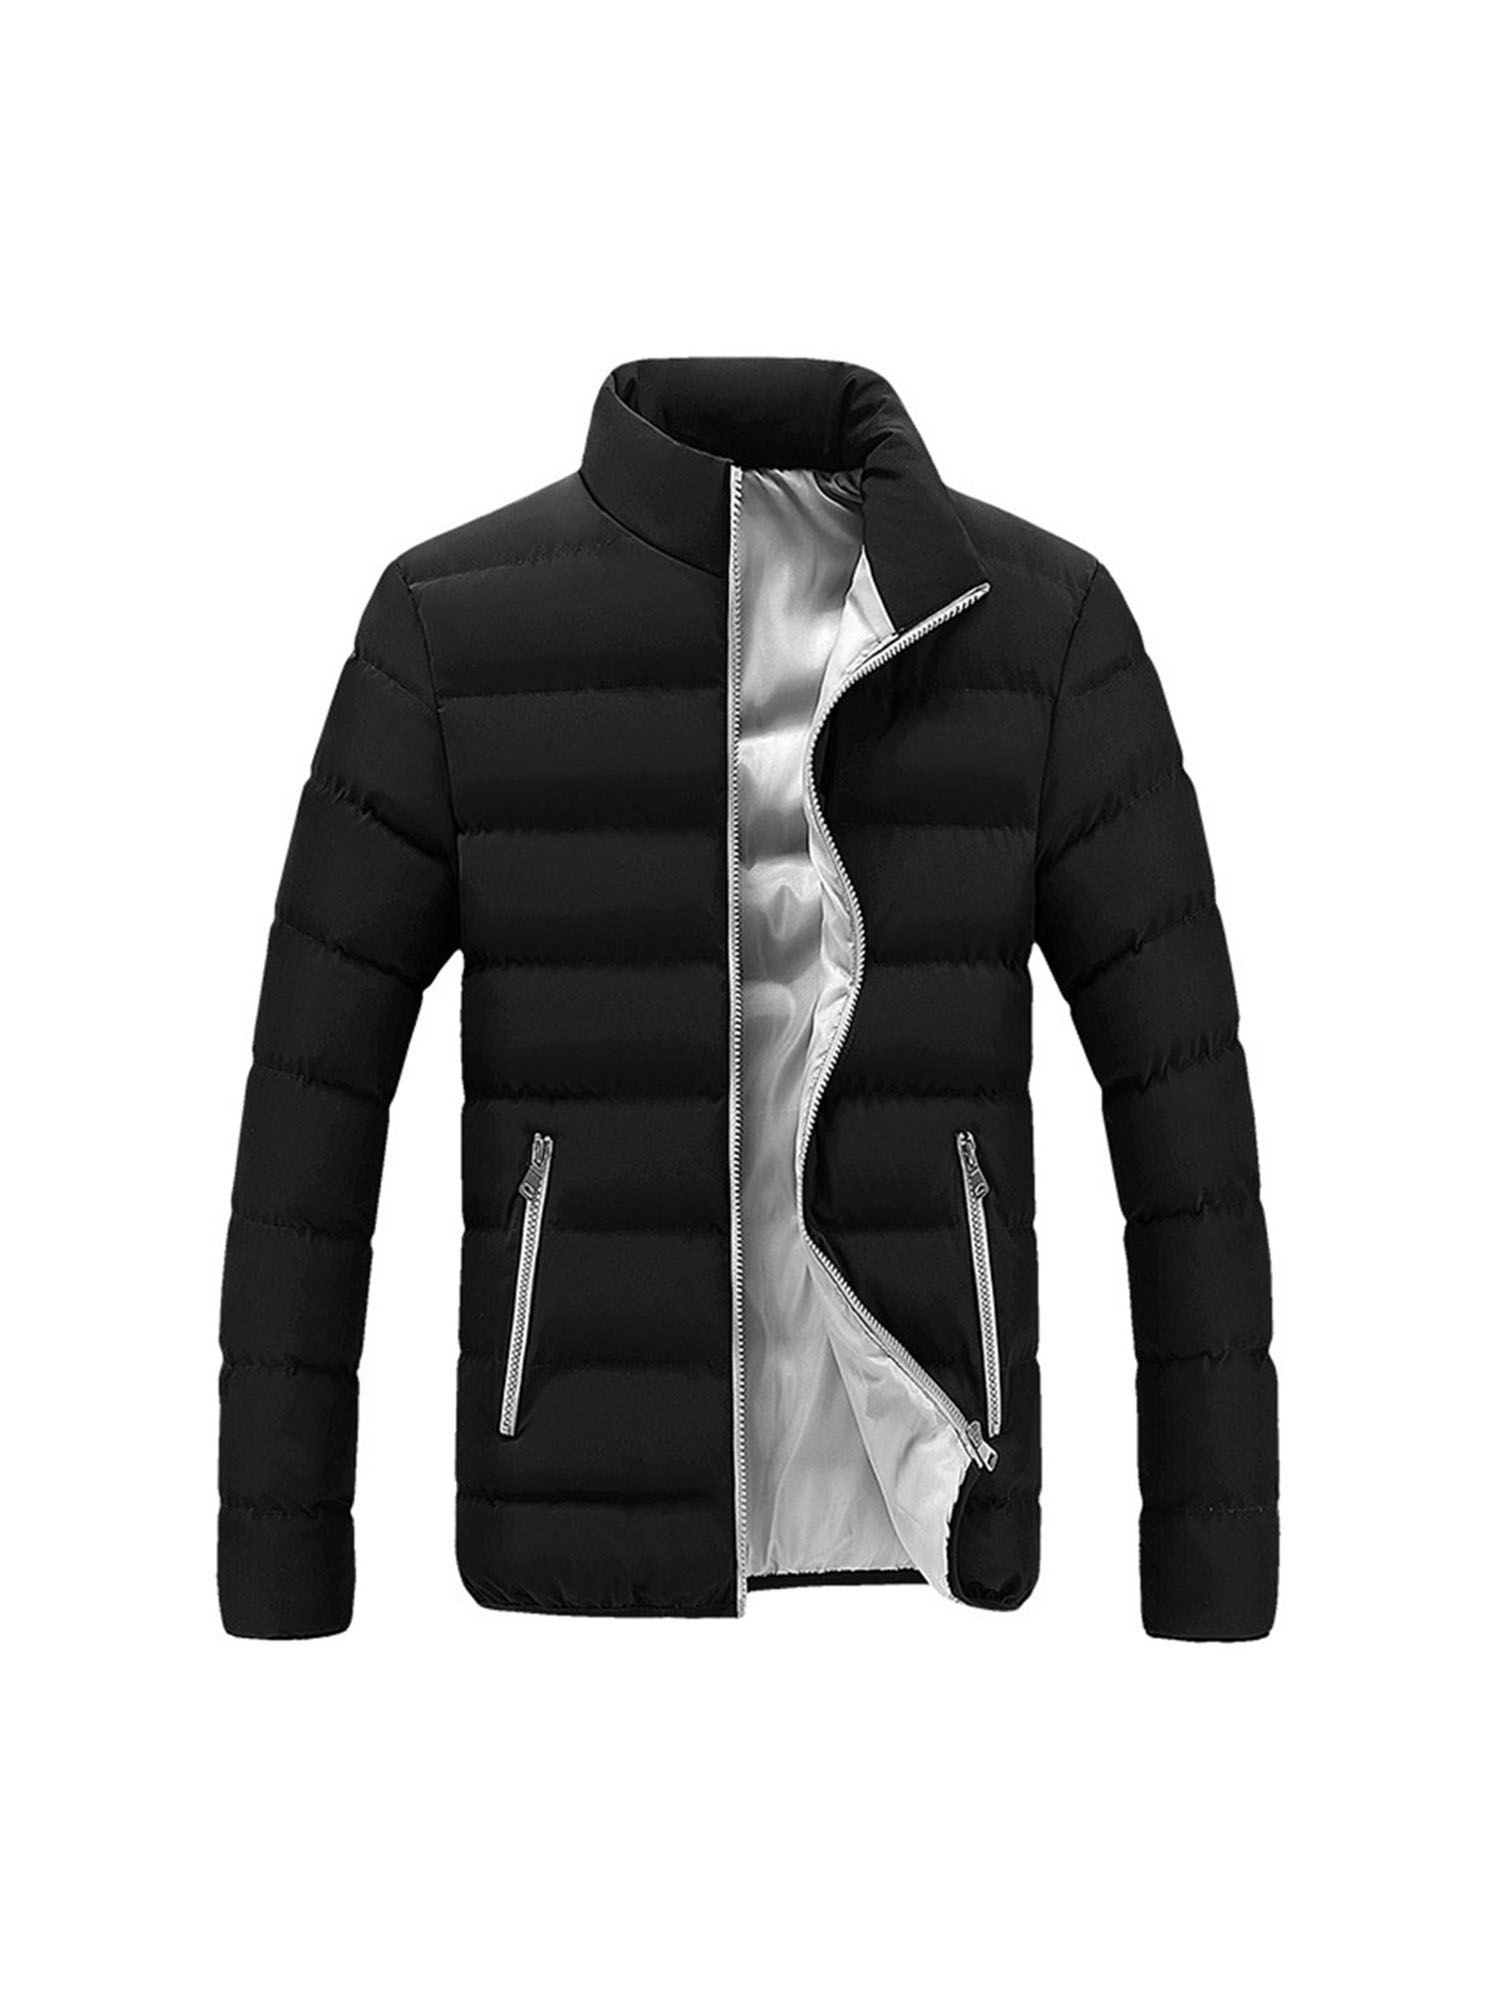 Stay Warm in Style: Men’s Jackets and Winter Coats for Rs. 125 Only